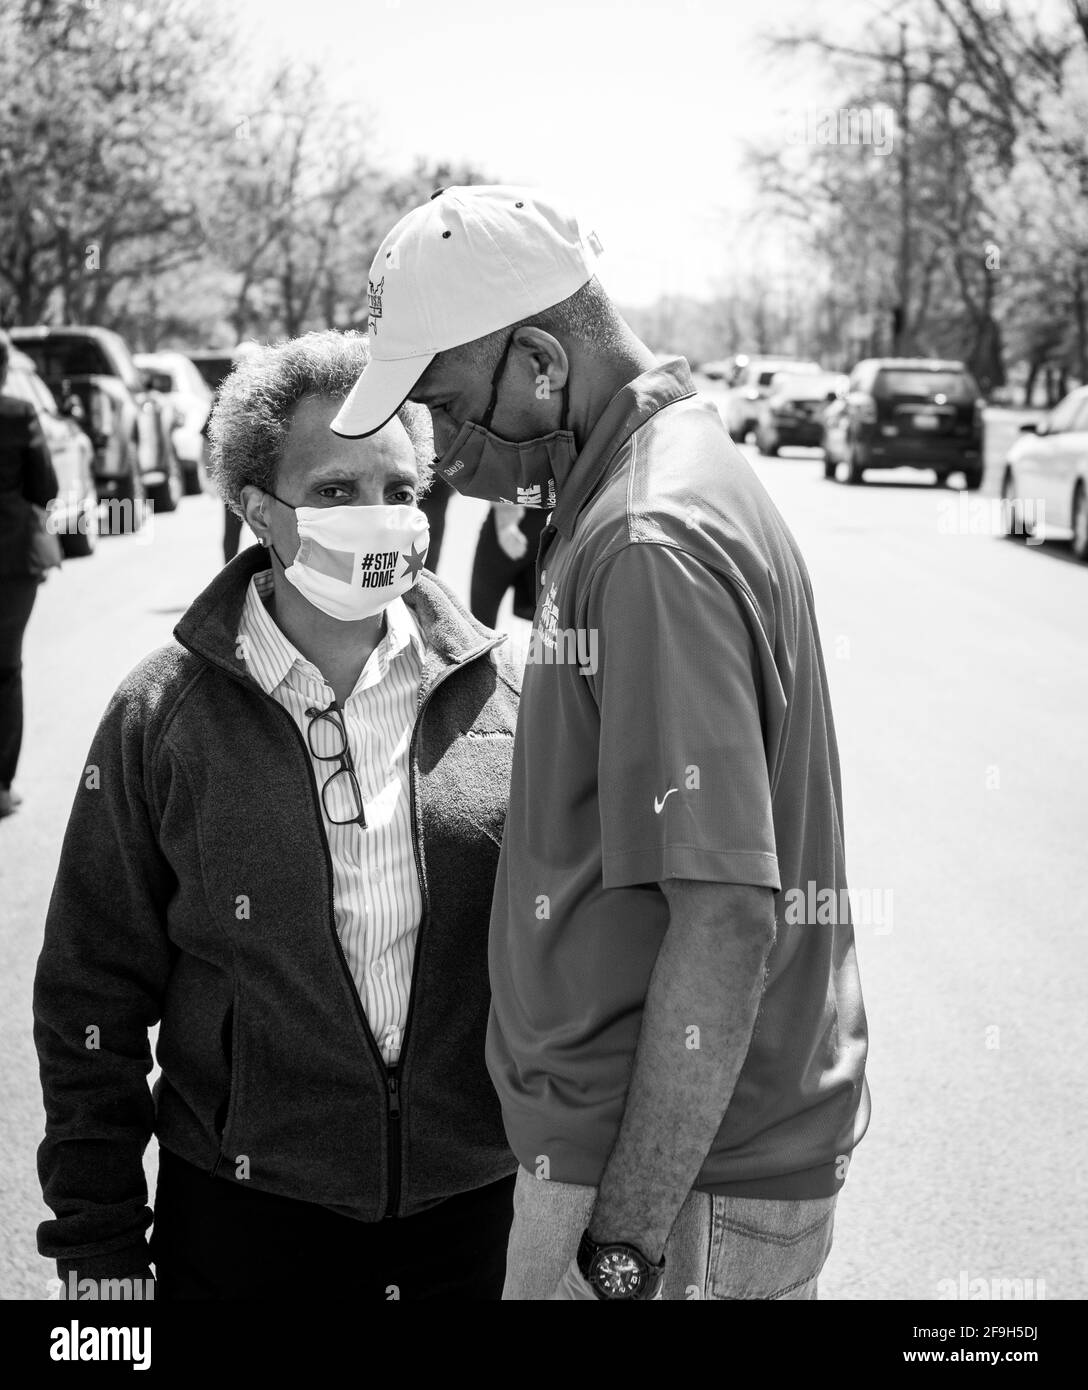 CHICAGO, IL. USA MAY 16, 2020: CHICAGO MAYOR LORI LIGHTFOOT & ALDERMAN DAVID MOORE HAVING A DISCUSSION AT A FOOD GIVEAWAY DURING COVID 19 CRISIS Stock Photo